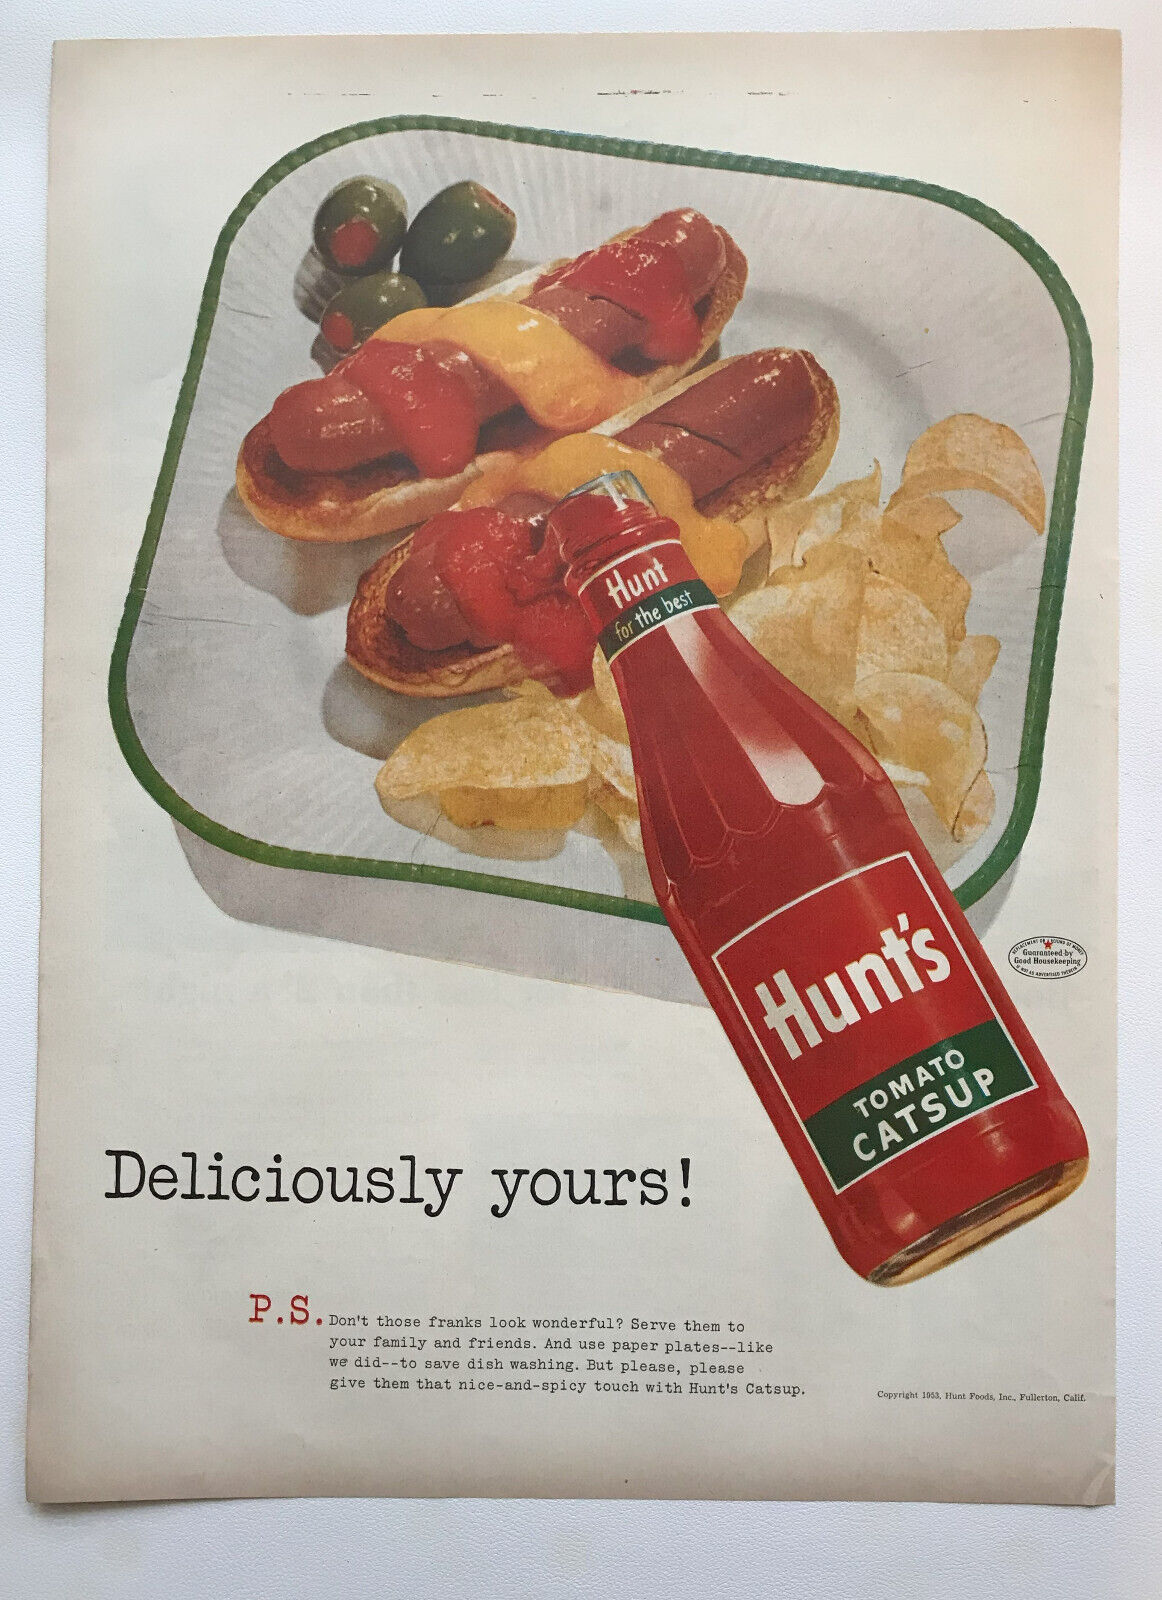 1953 Hunt's Tomato Catsup, Simmons Beautyrest Mattress Vintage Print Ads